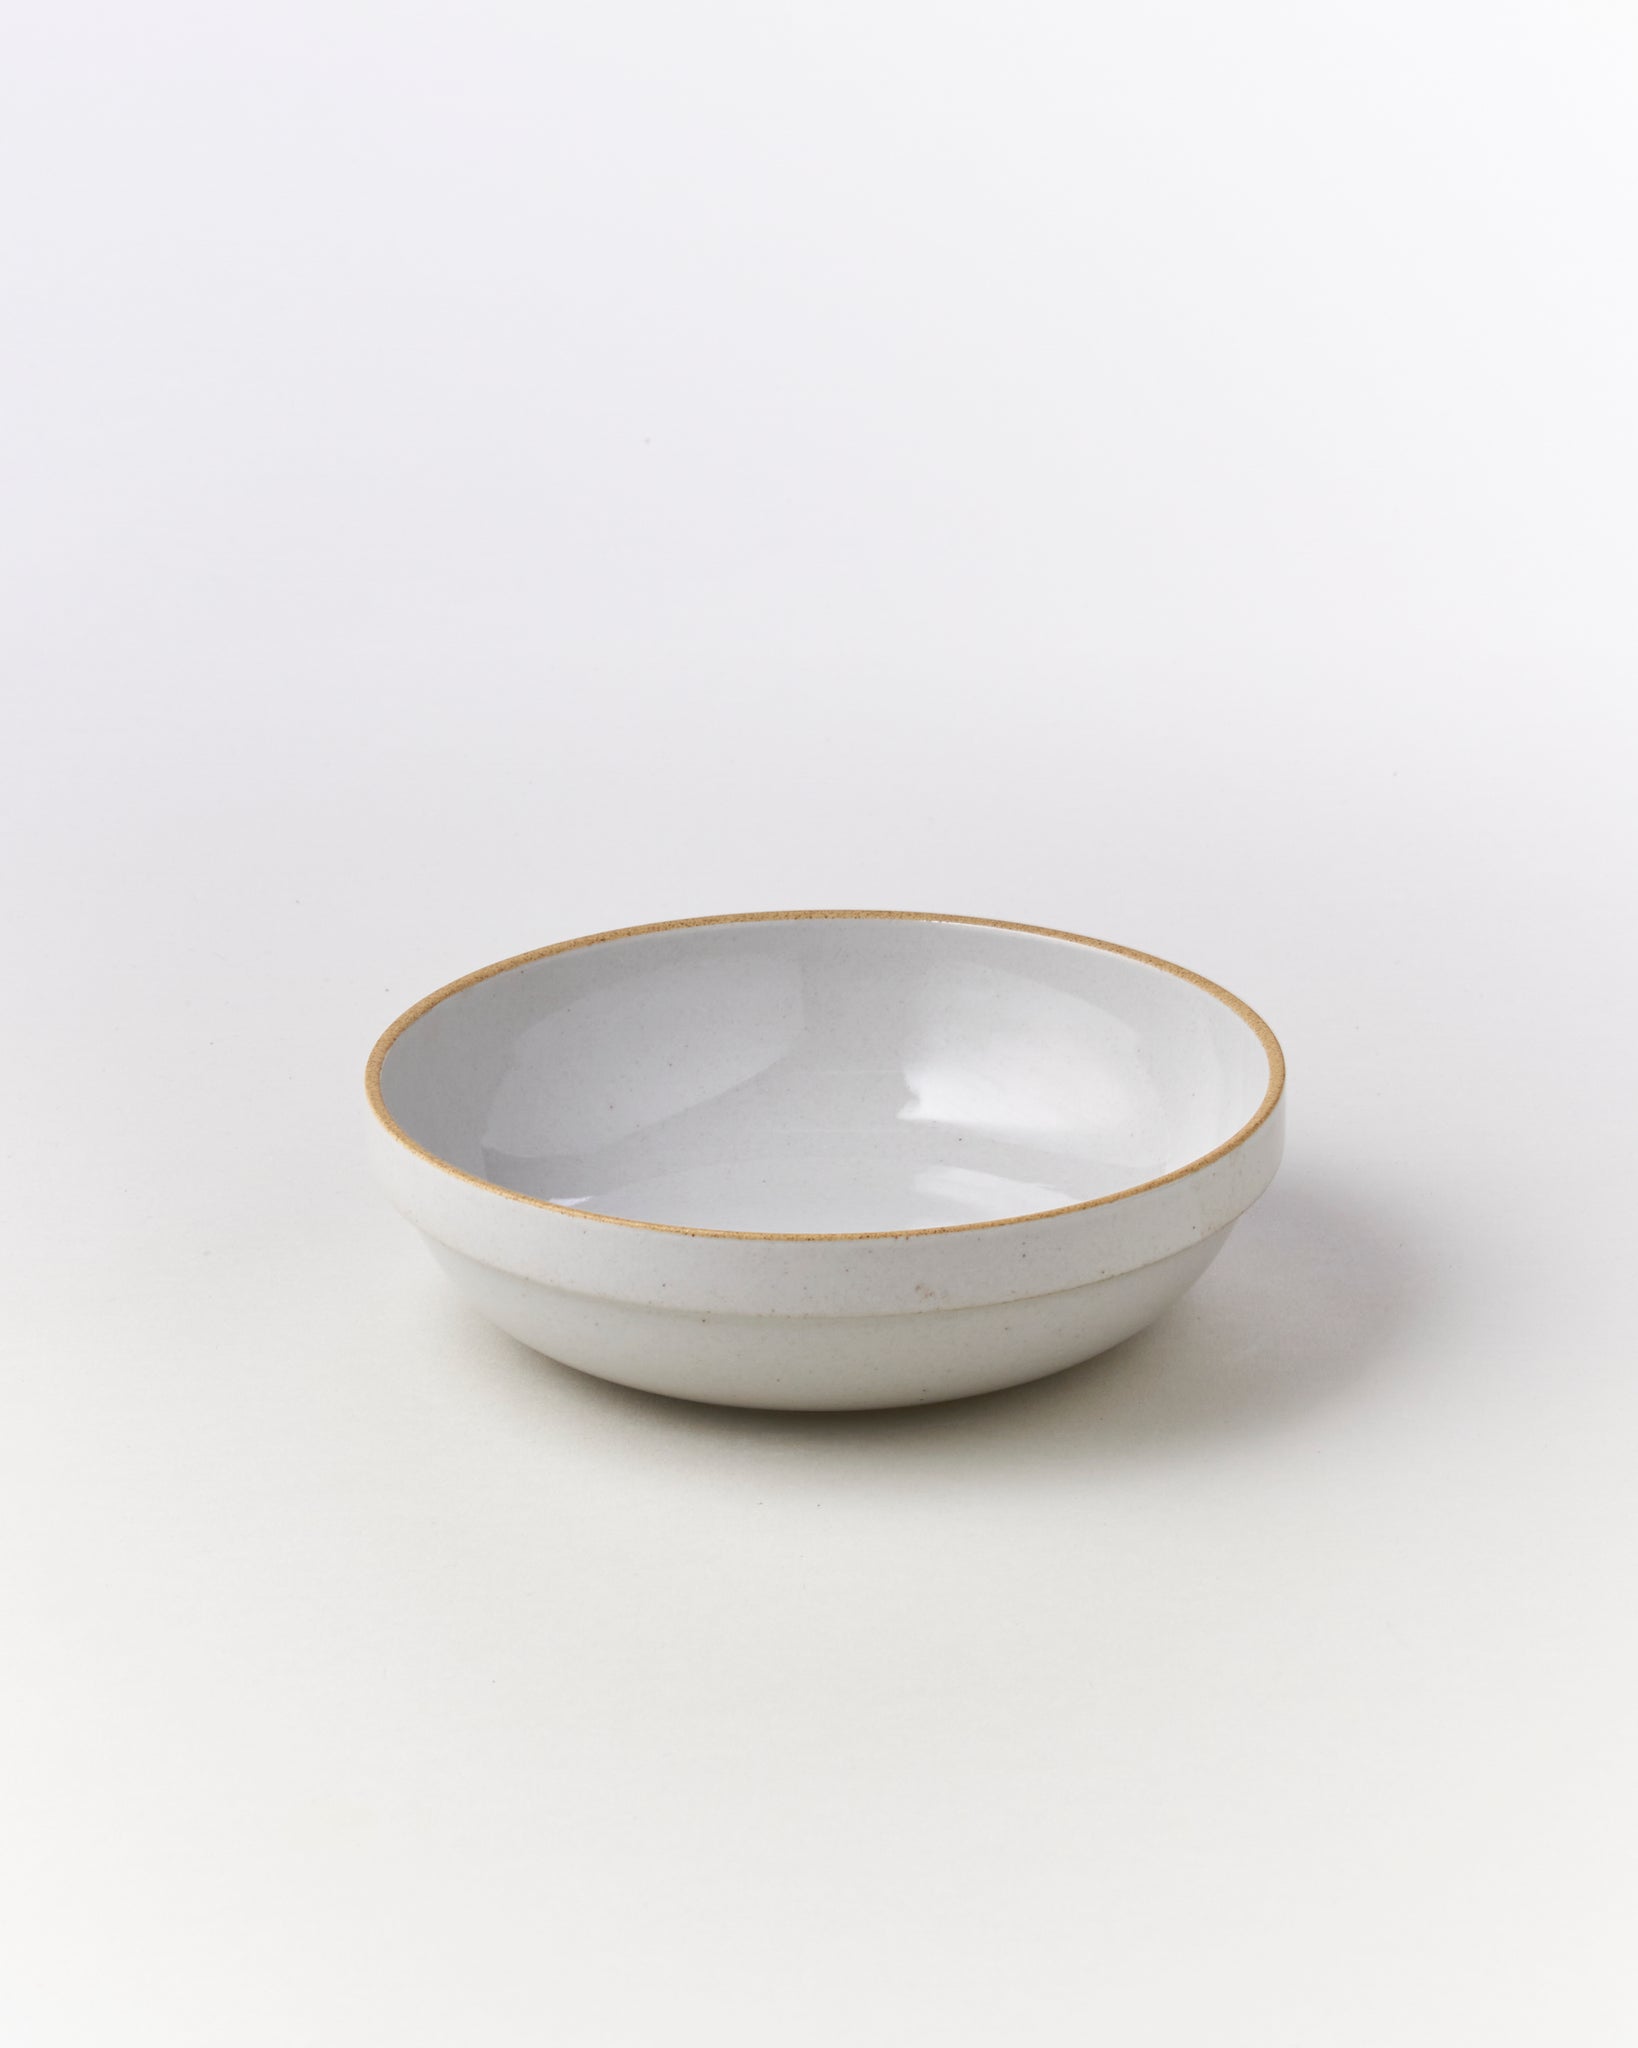 Hasami 7 3/8-inch Round Bowl in Gloss Grey